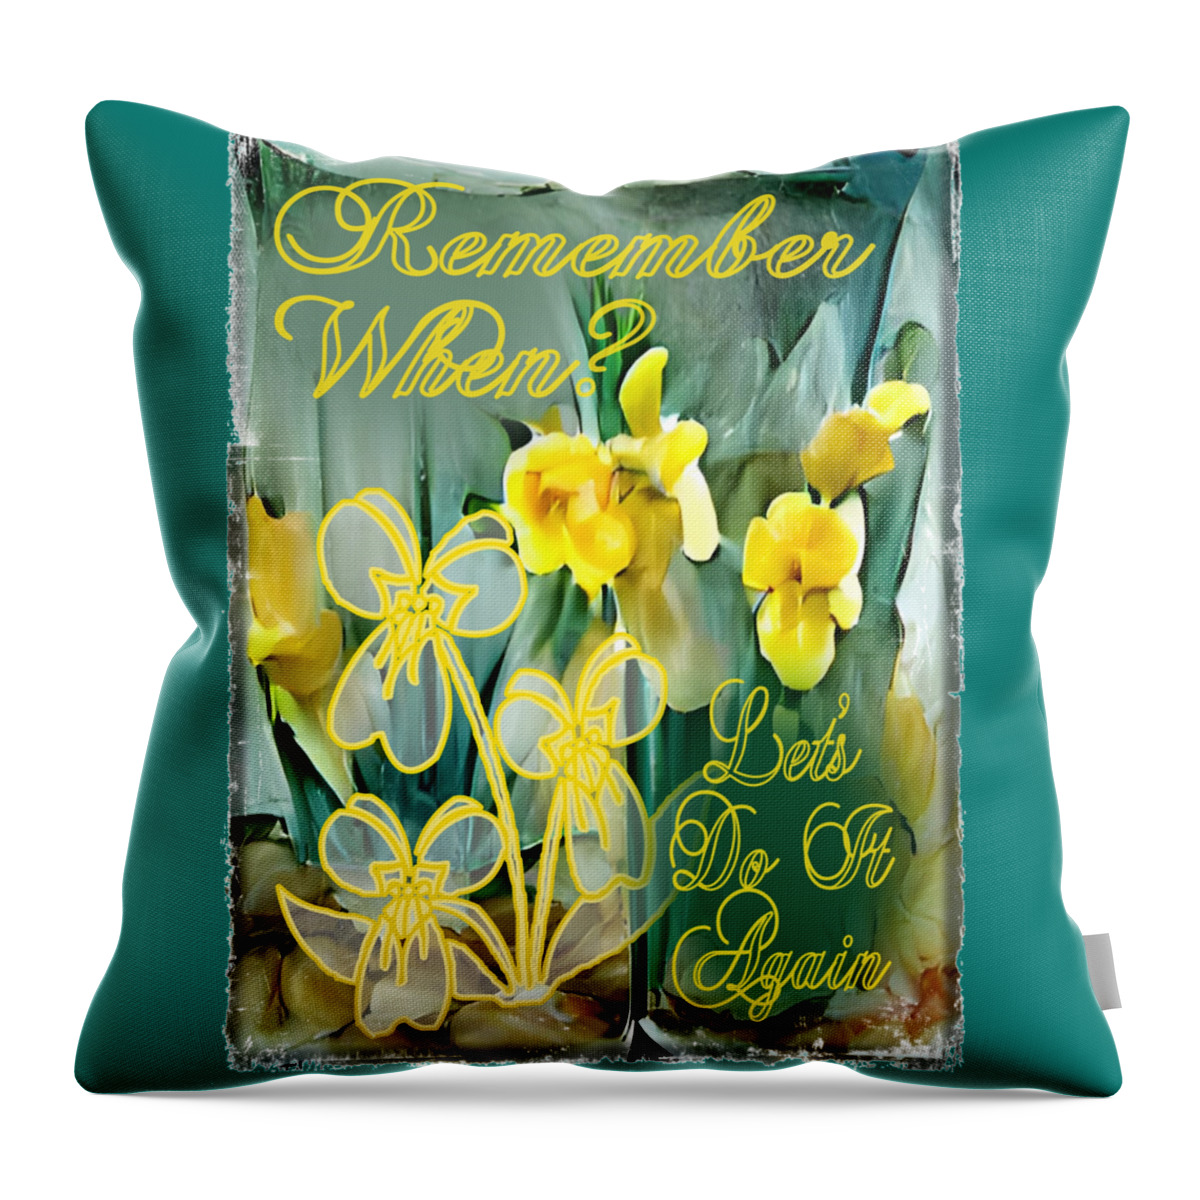 Floral Throw Pillow featuring the digital art Floral Date Night Remember When by Delynn Addams